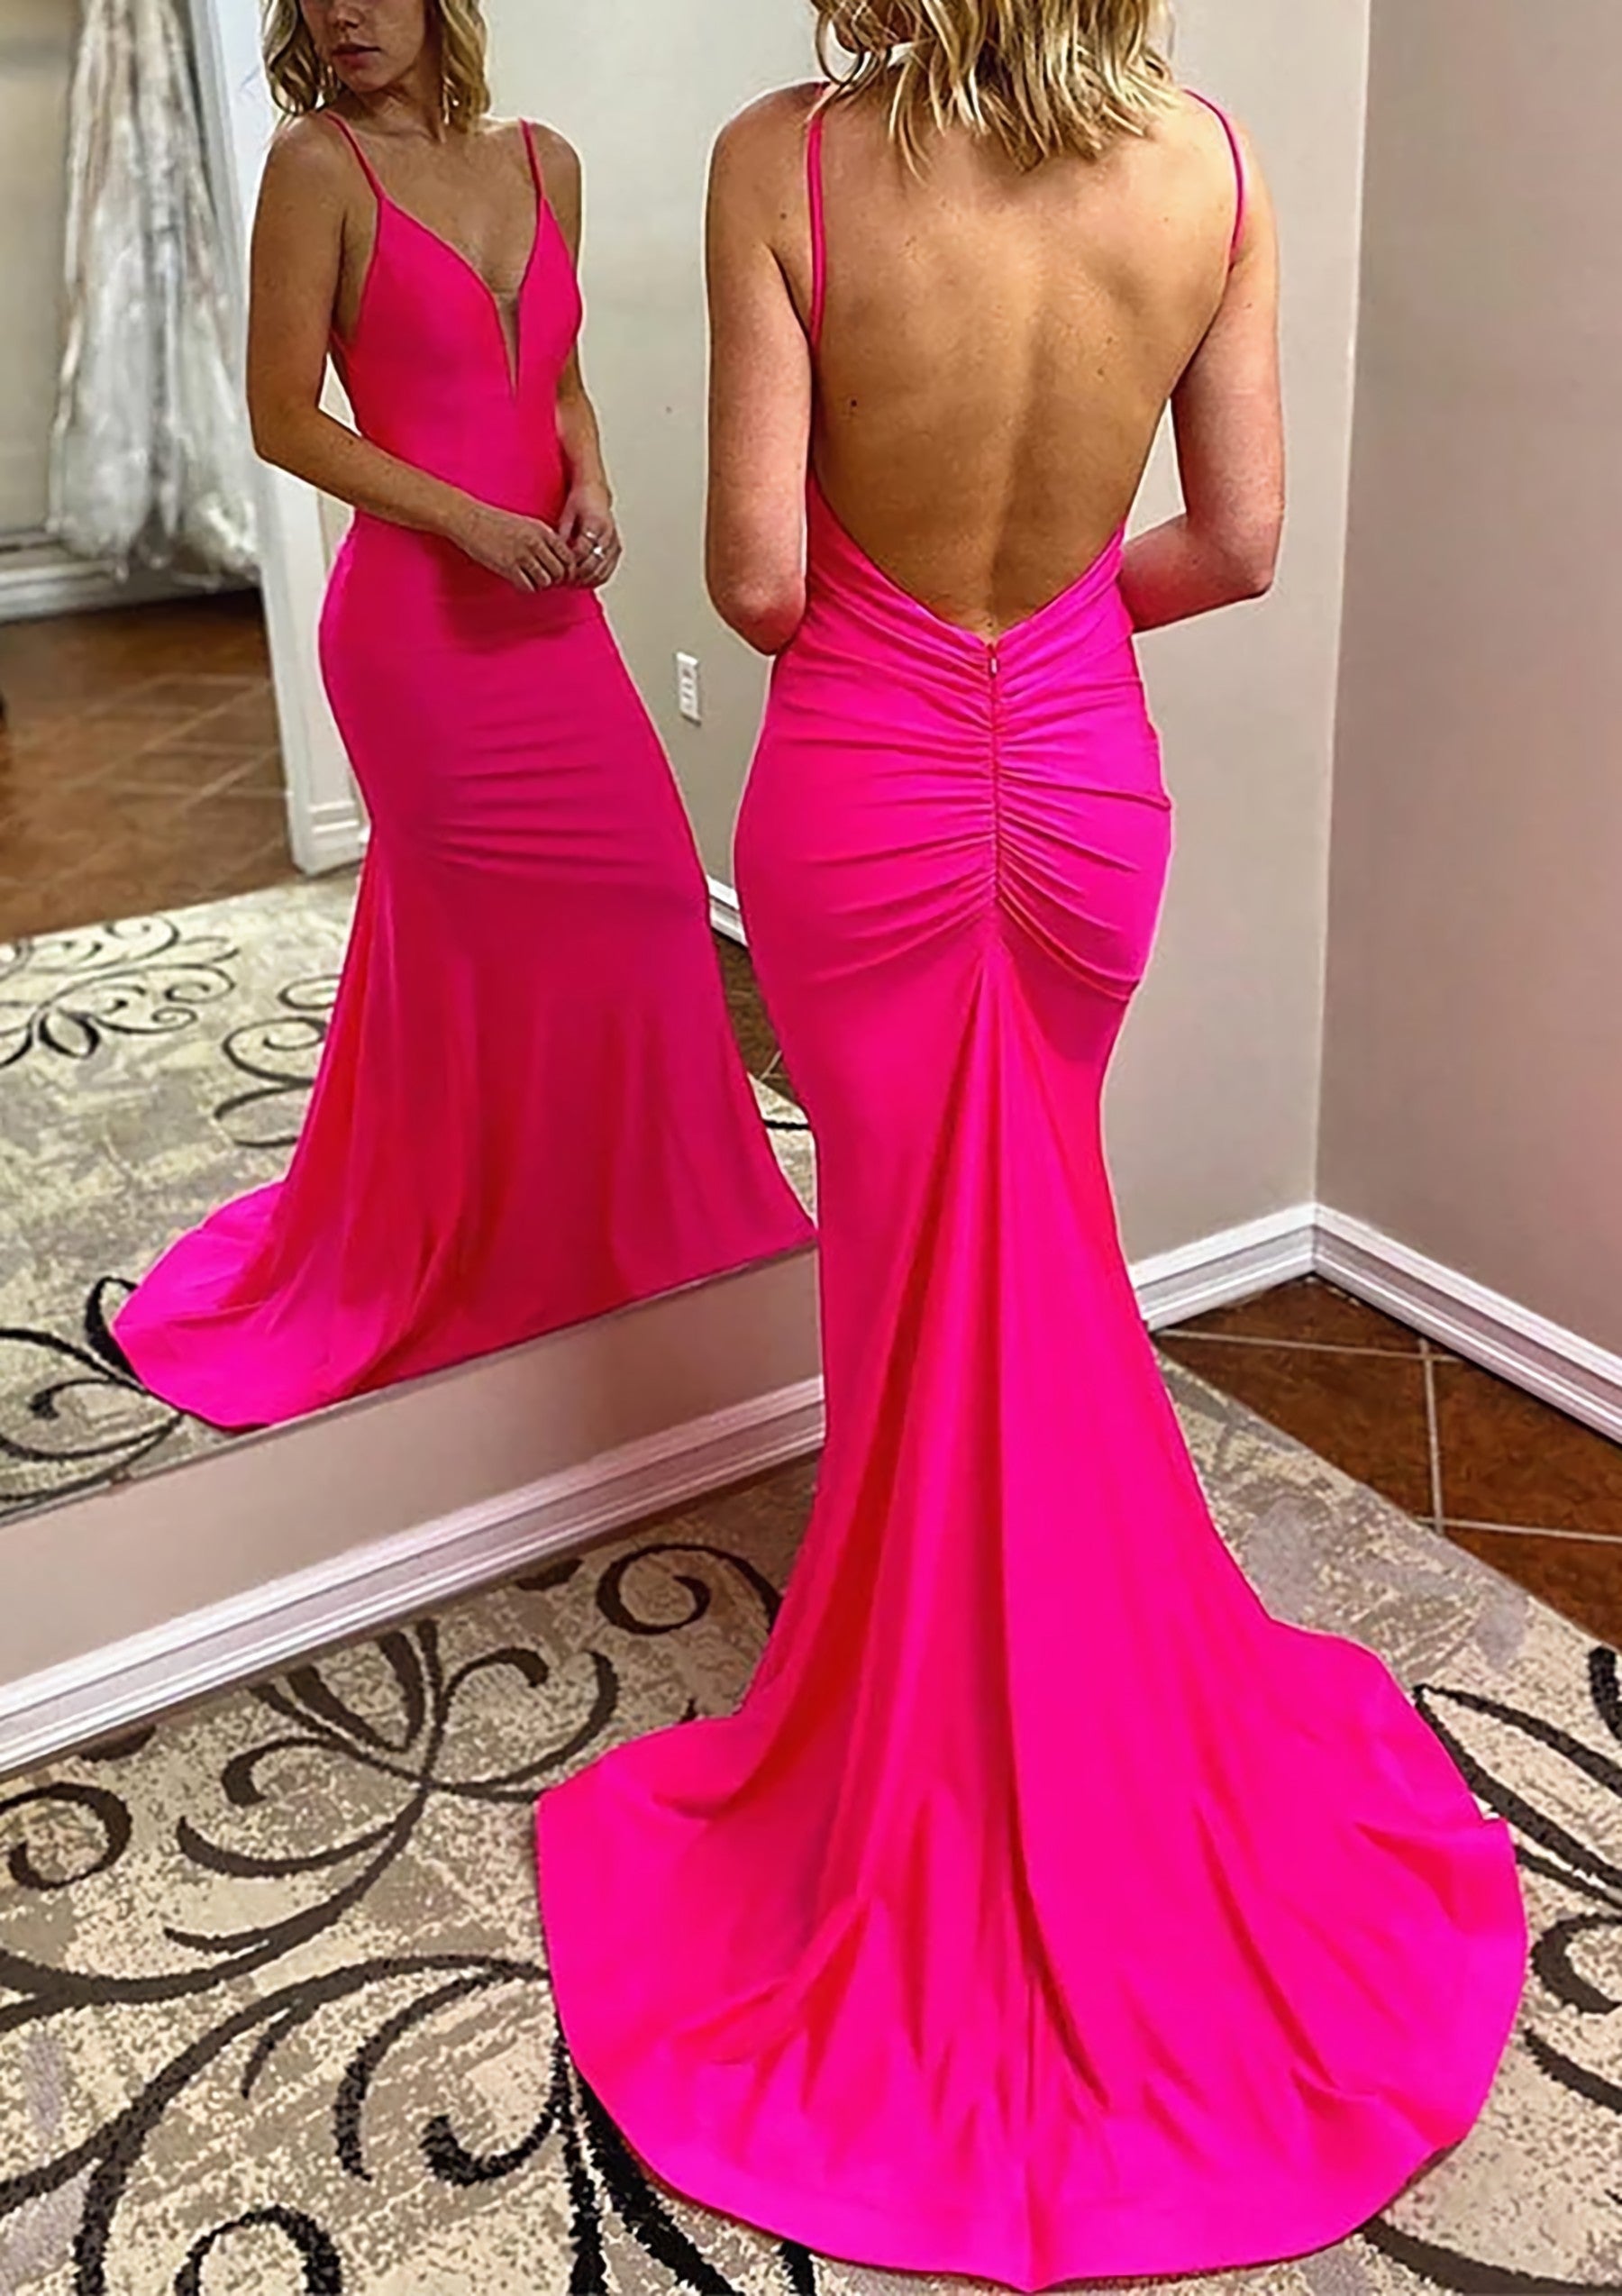 Trumpet/Mermaid V Neck Spaghetti Straps Court Train Jersey Corset Prom Dress With Pleated Gowns, Prom Dresses Cute